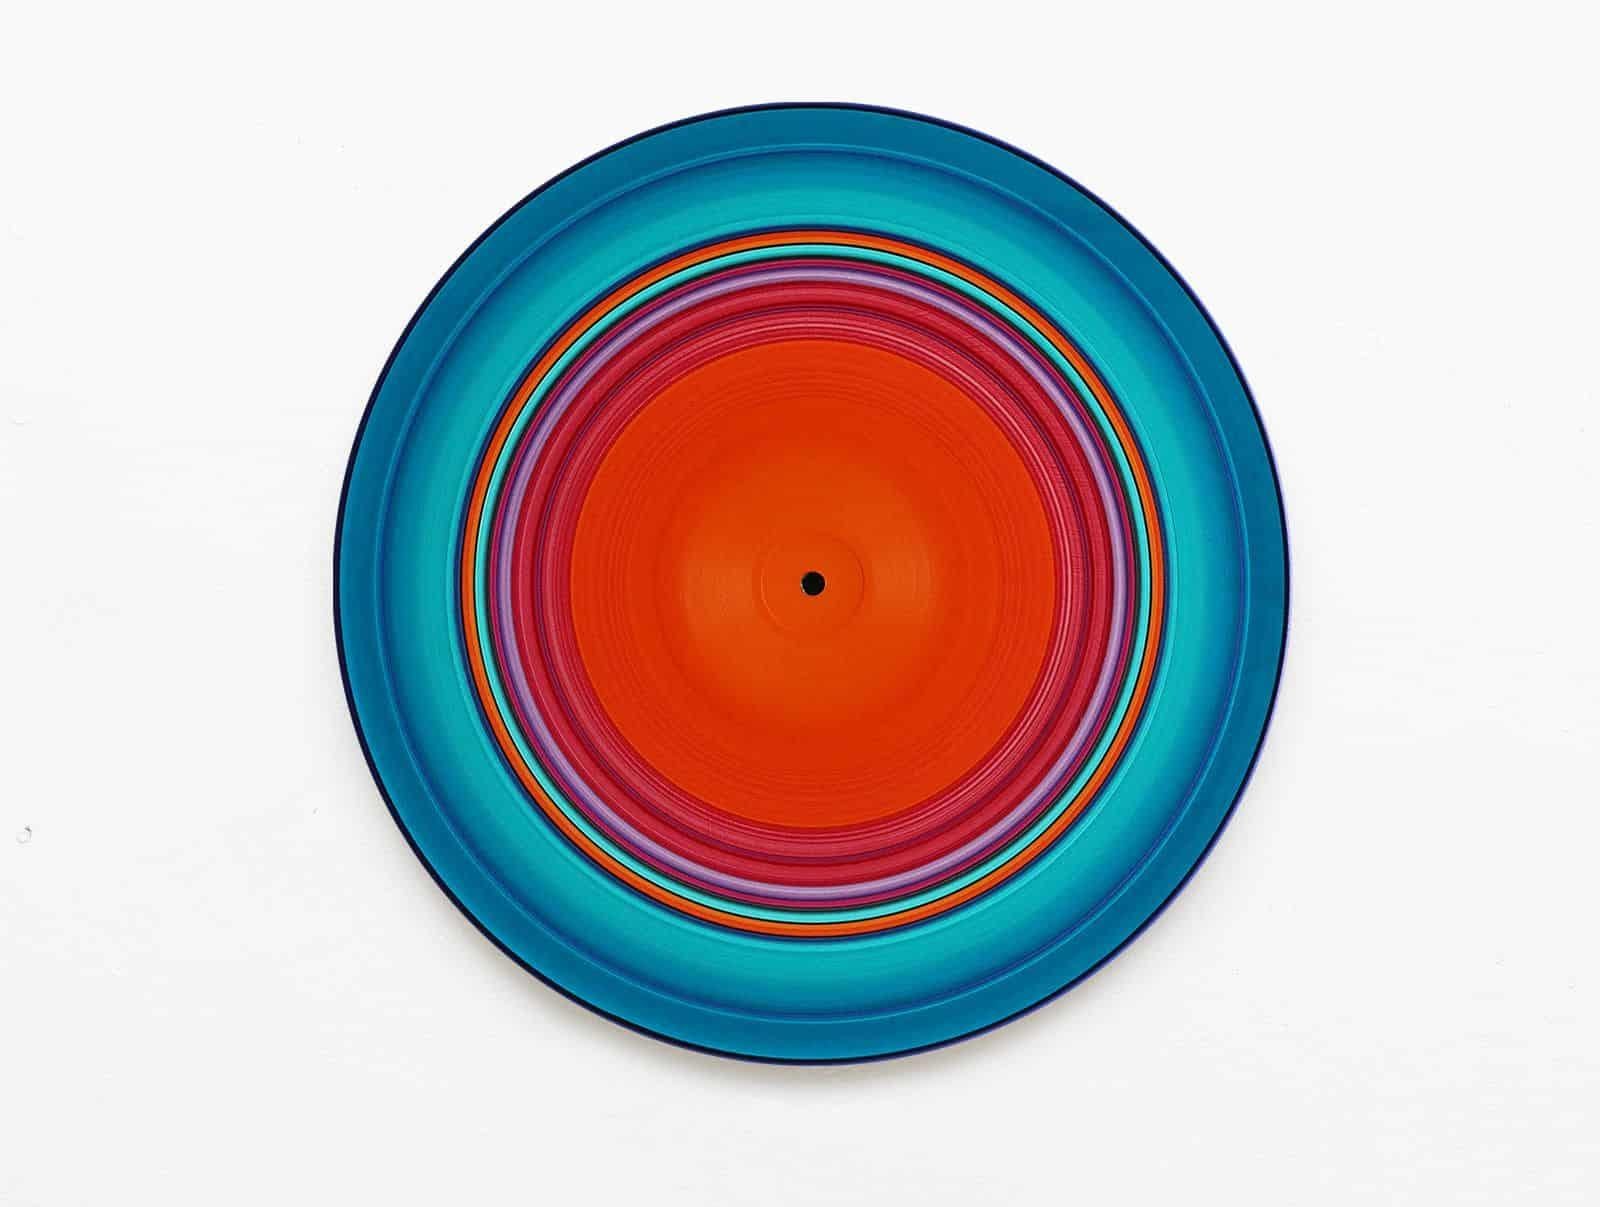 Turquoise Edition No.12, is a unique oil on vinyl painting by German contemporary artist Doris Marten, dimensions are 30 cm x 30 cm (11.8 × 11.8 in).
The artwork is signed, sold unframed and comes with a certificate of authenticity.

This artwork is